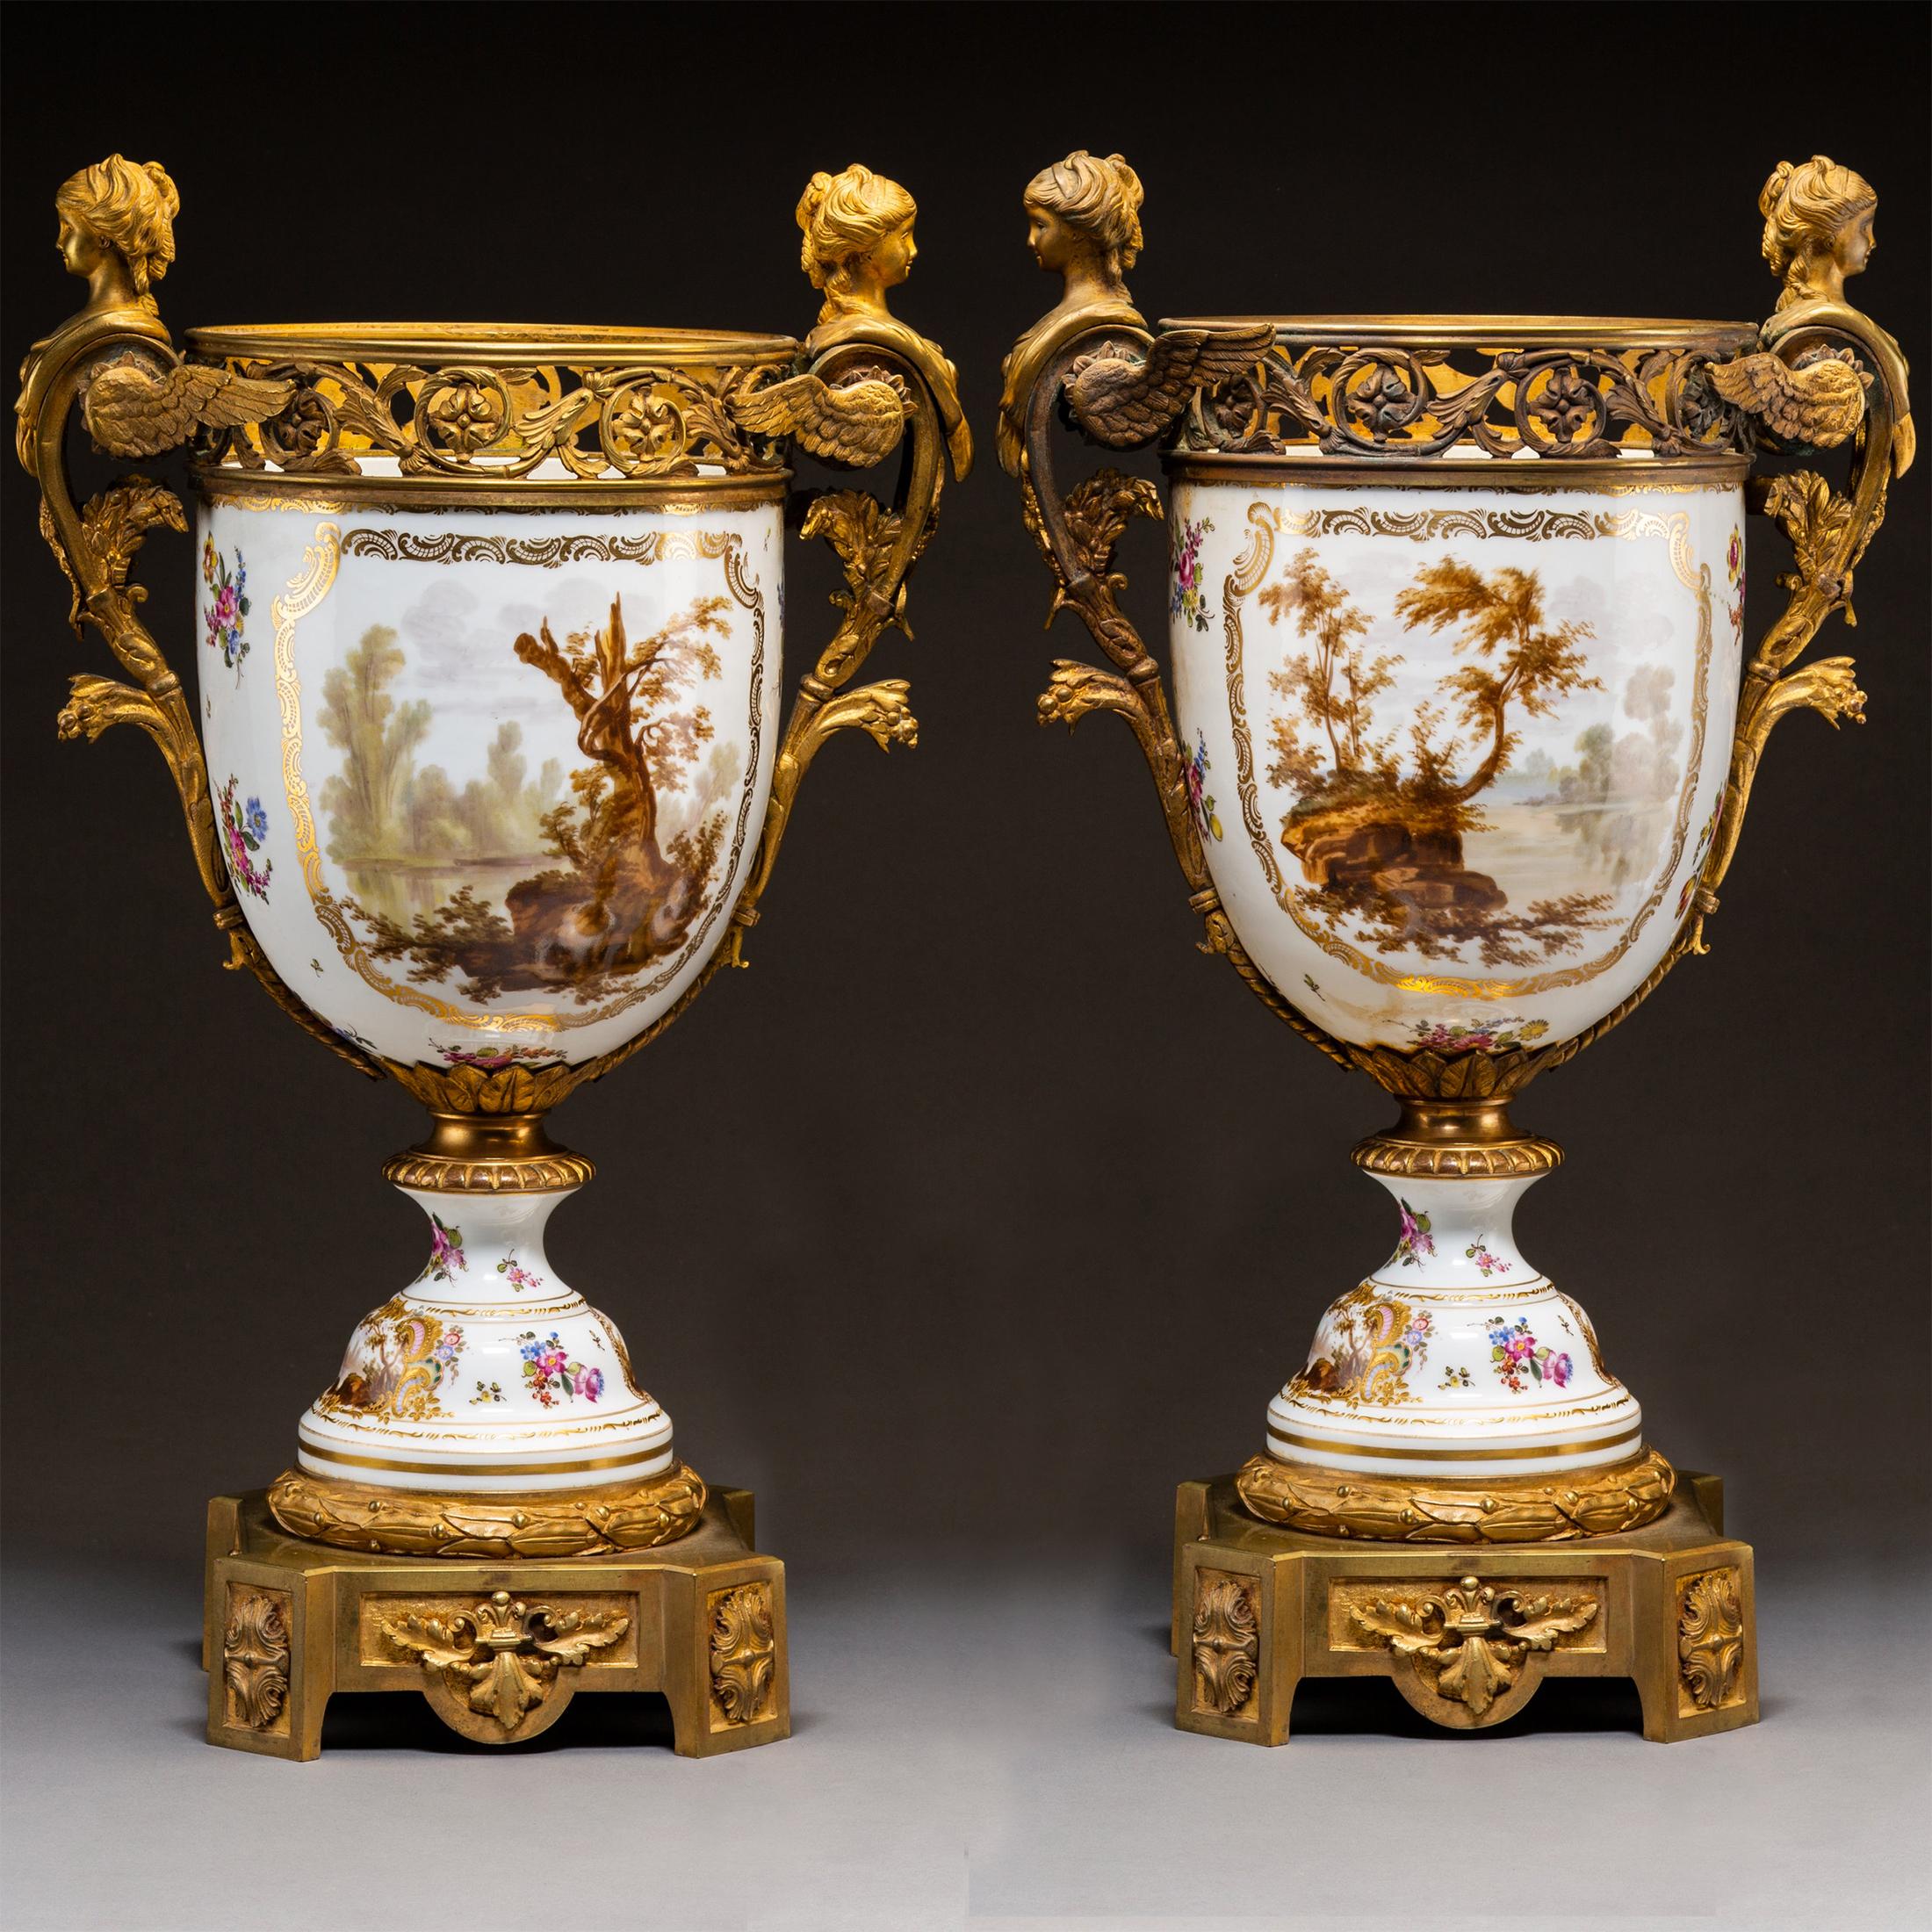 French Early 20th Century Pair of Continental Gilt Bronze-Mounted Painted Porcelain Urn